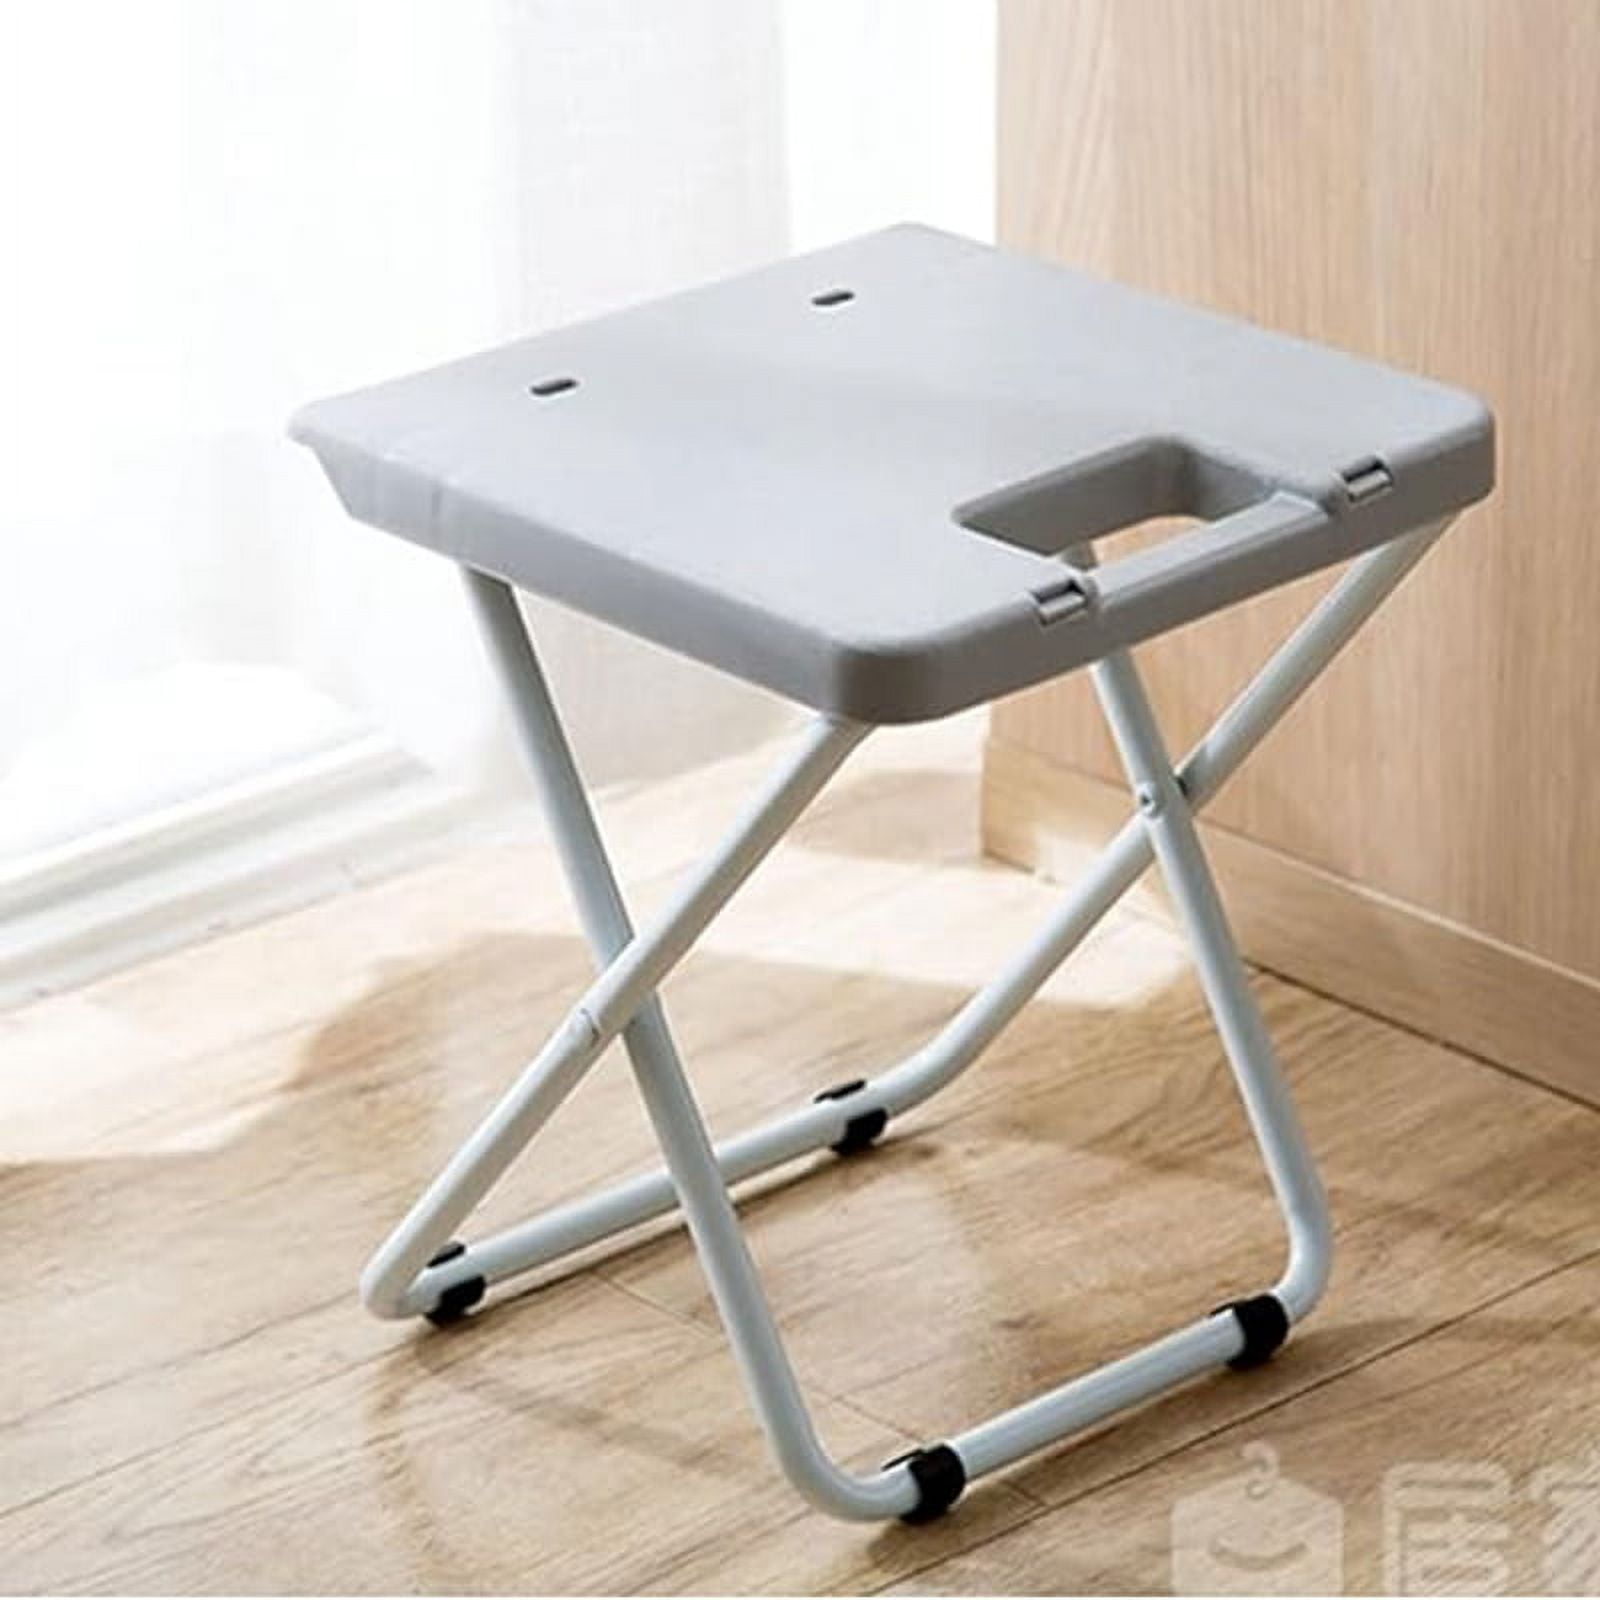 Portable Folding Stool, Compact Collapsible Chair, Steel Frame Legs,  Outdoor Travel, Beach, Fishing, BBQ, Etc 